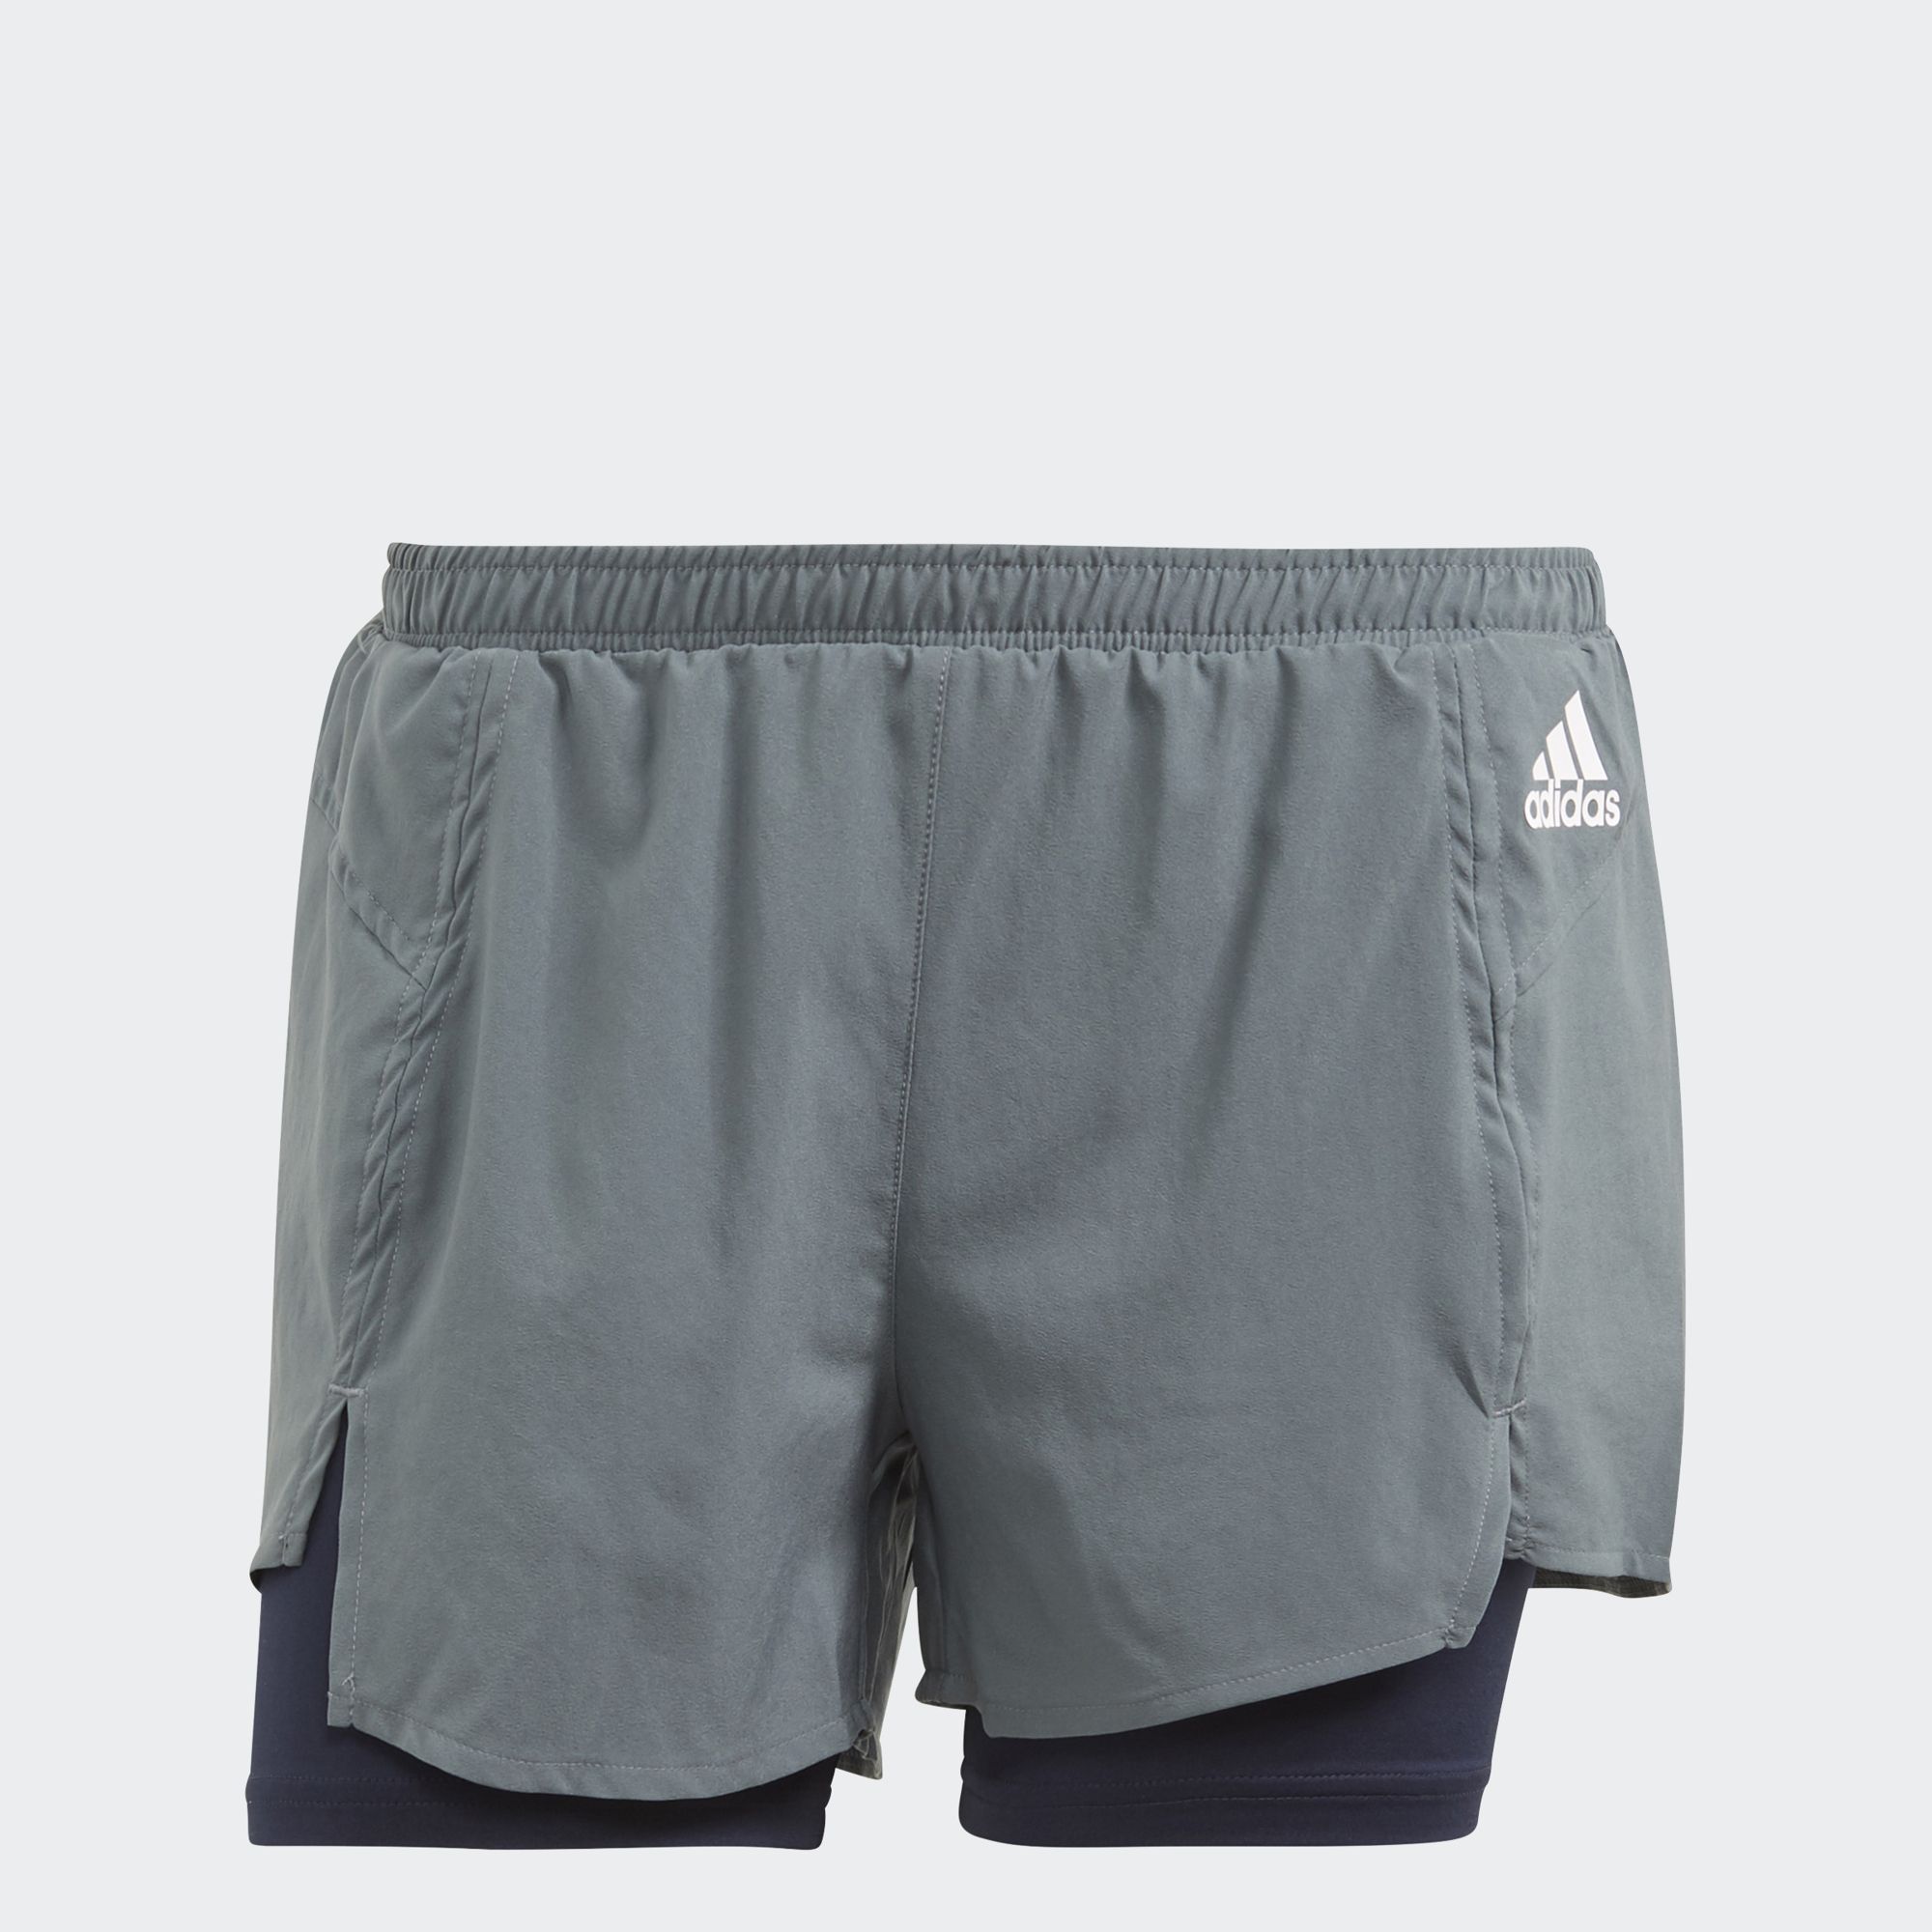 adidas TRAINING Primeblue Designed To Move 2-in-1 Sport Shorts ผู้หญิง GL4036